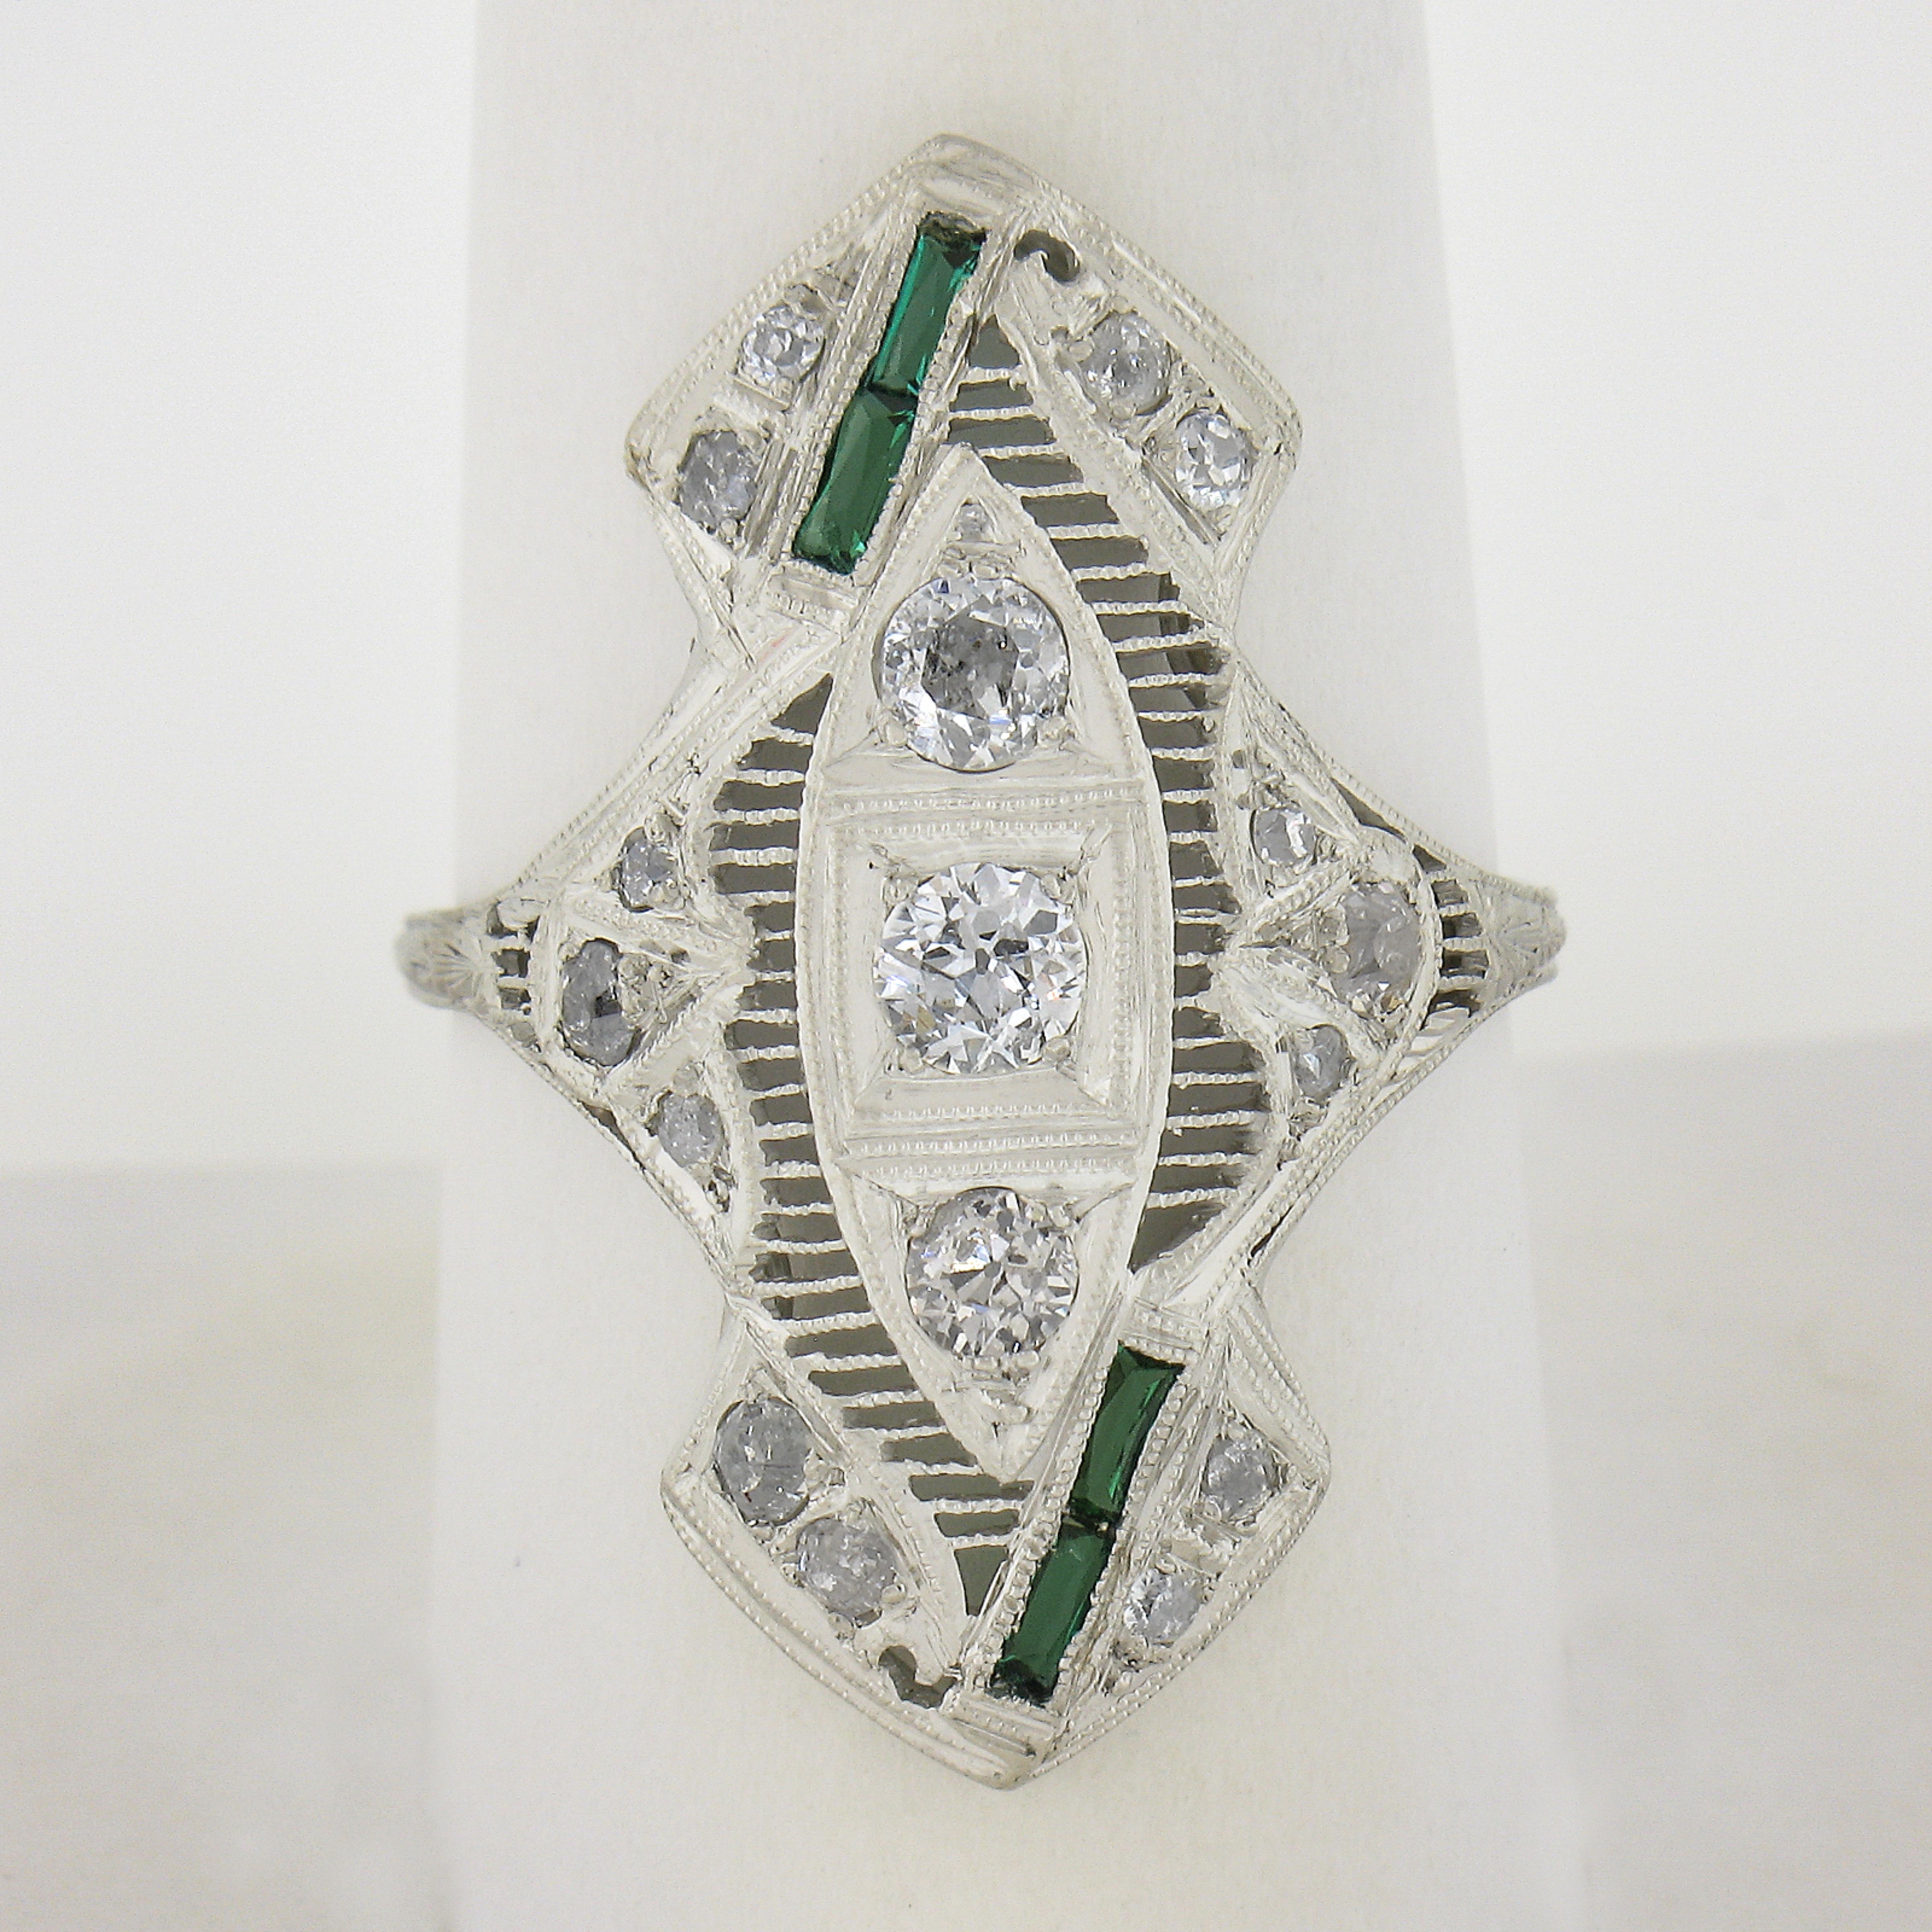 This incredible, antique art deco period ring is crafted in solid platinum. The ring showcases 17 old European & single cut diamonds elegantly pave set throughout the long and unusual design in which is further further accented with 4 rectangular